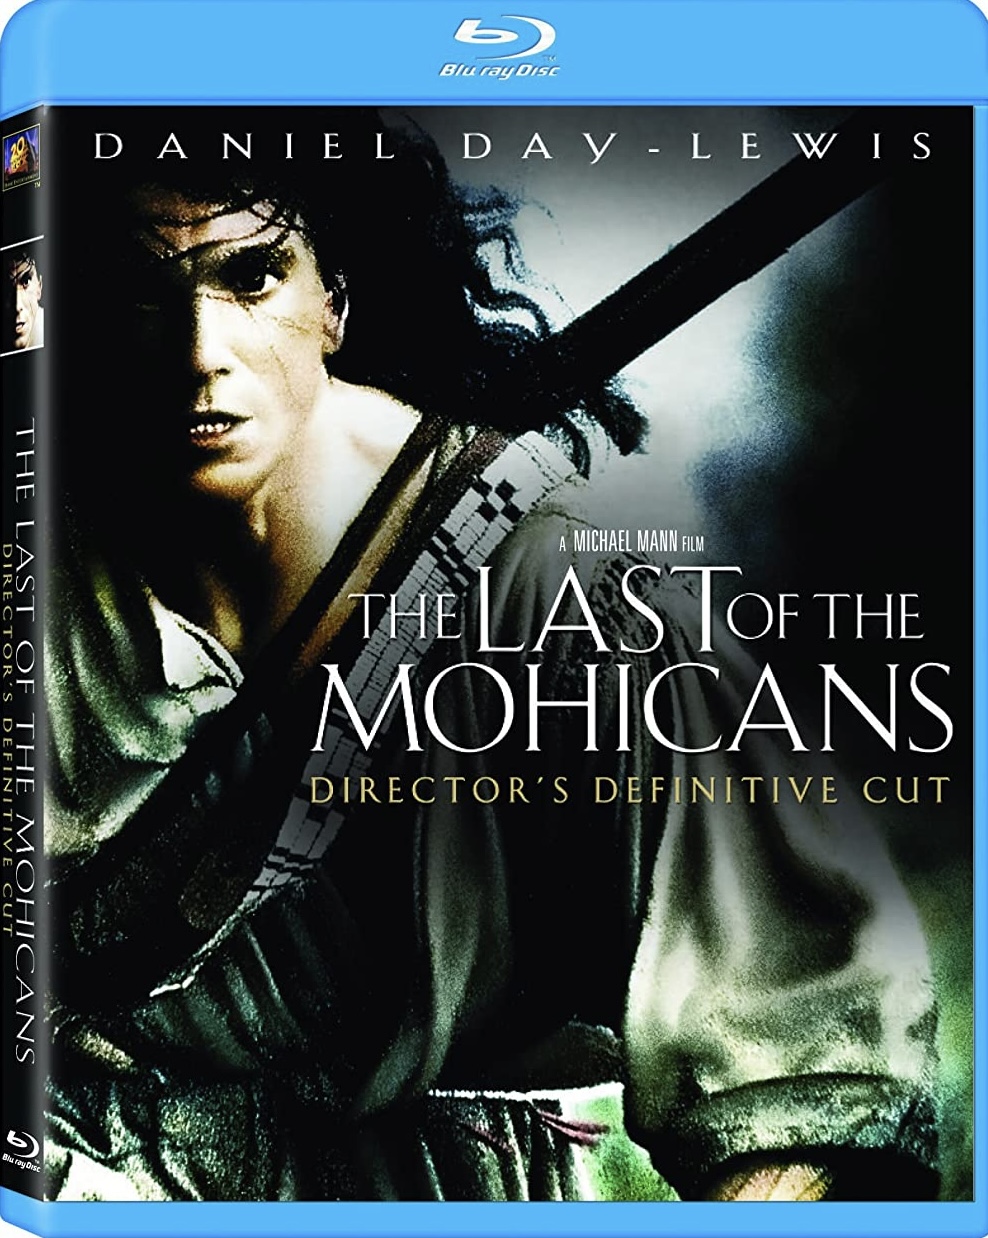 Making 'the Last of the Mohicans'